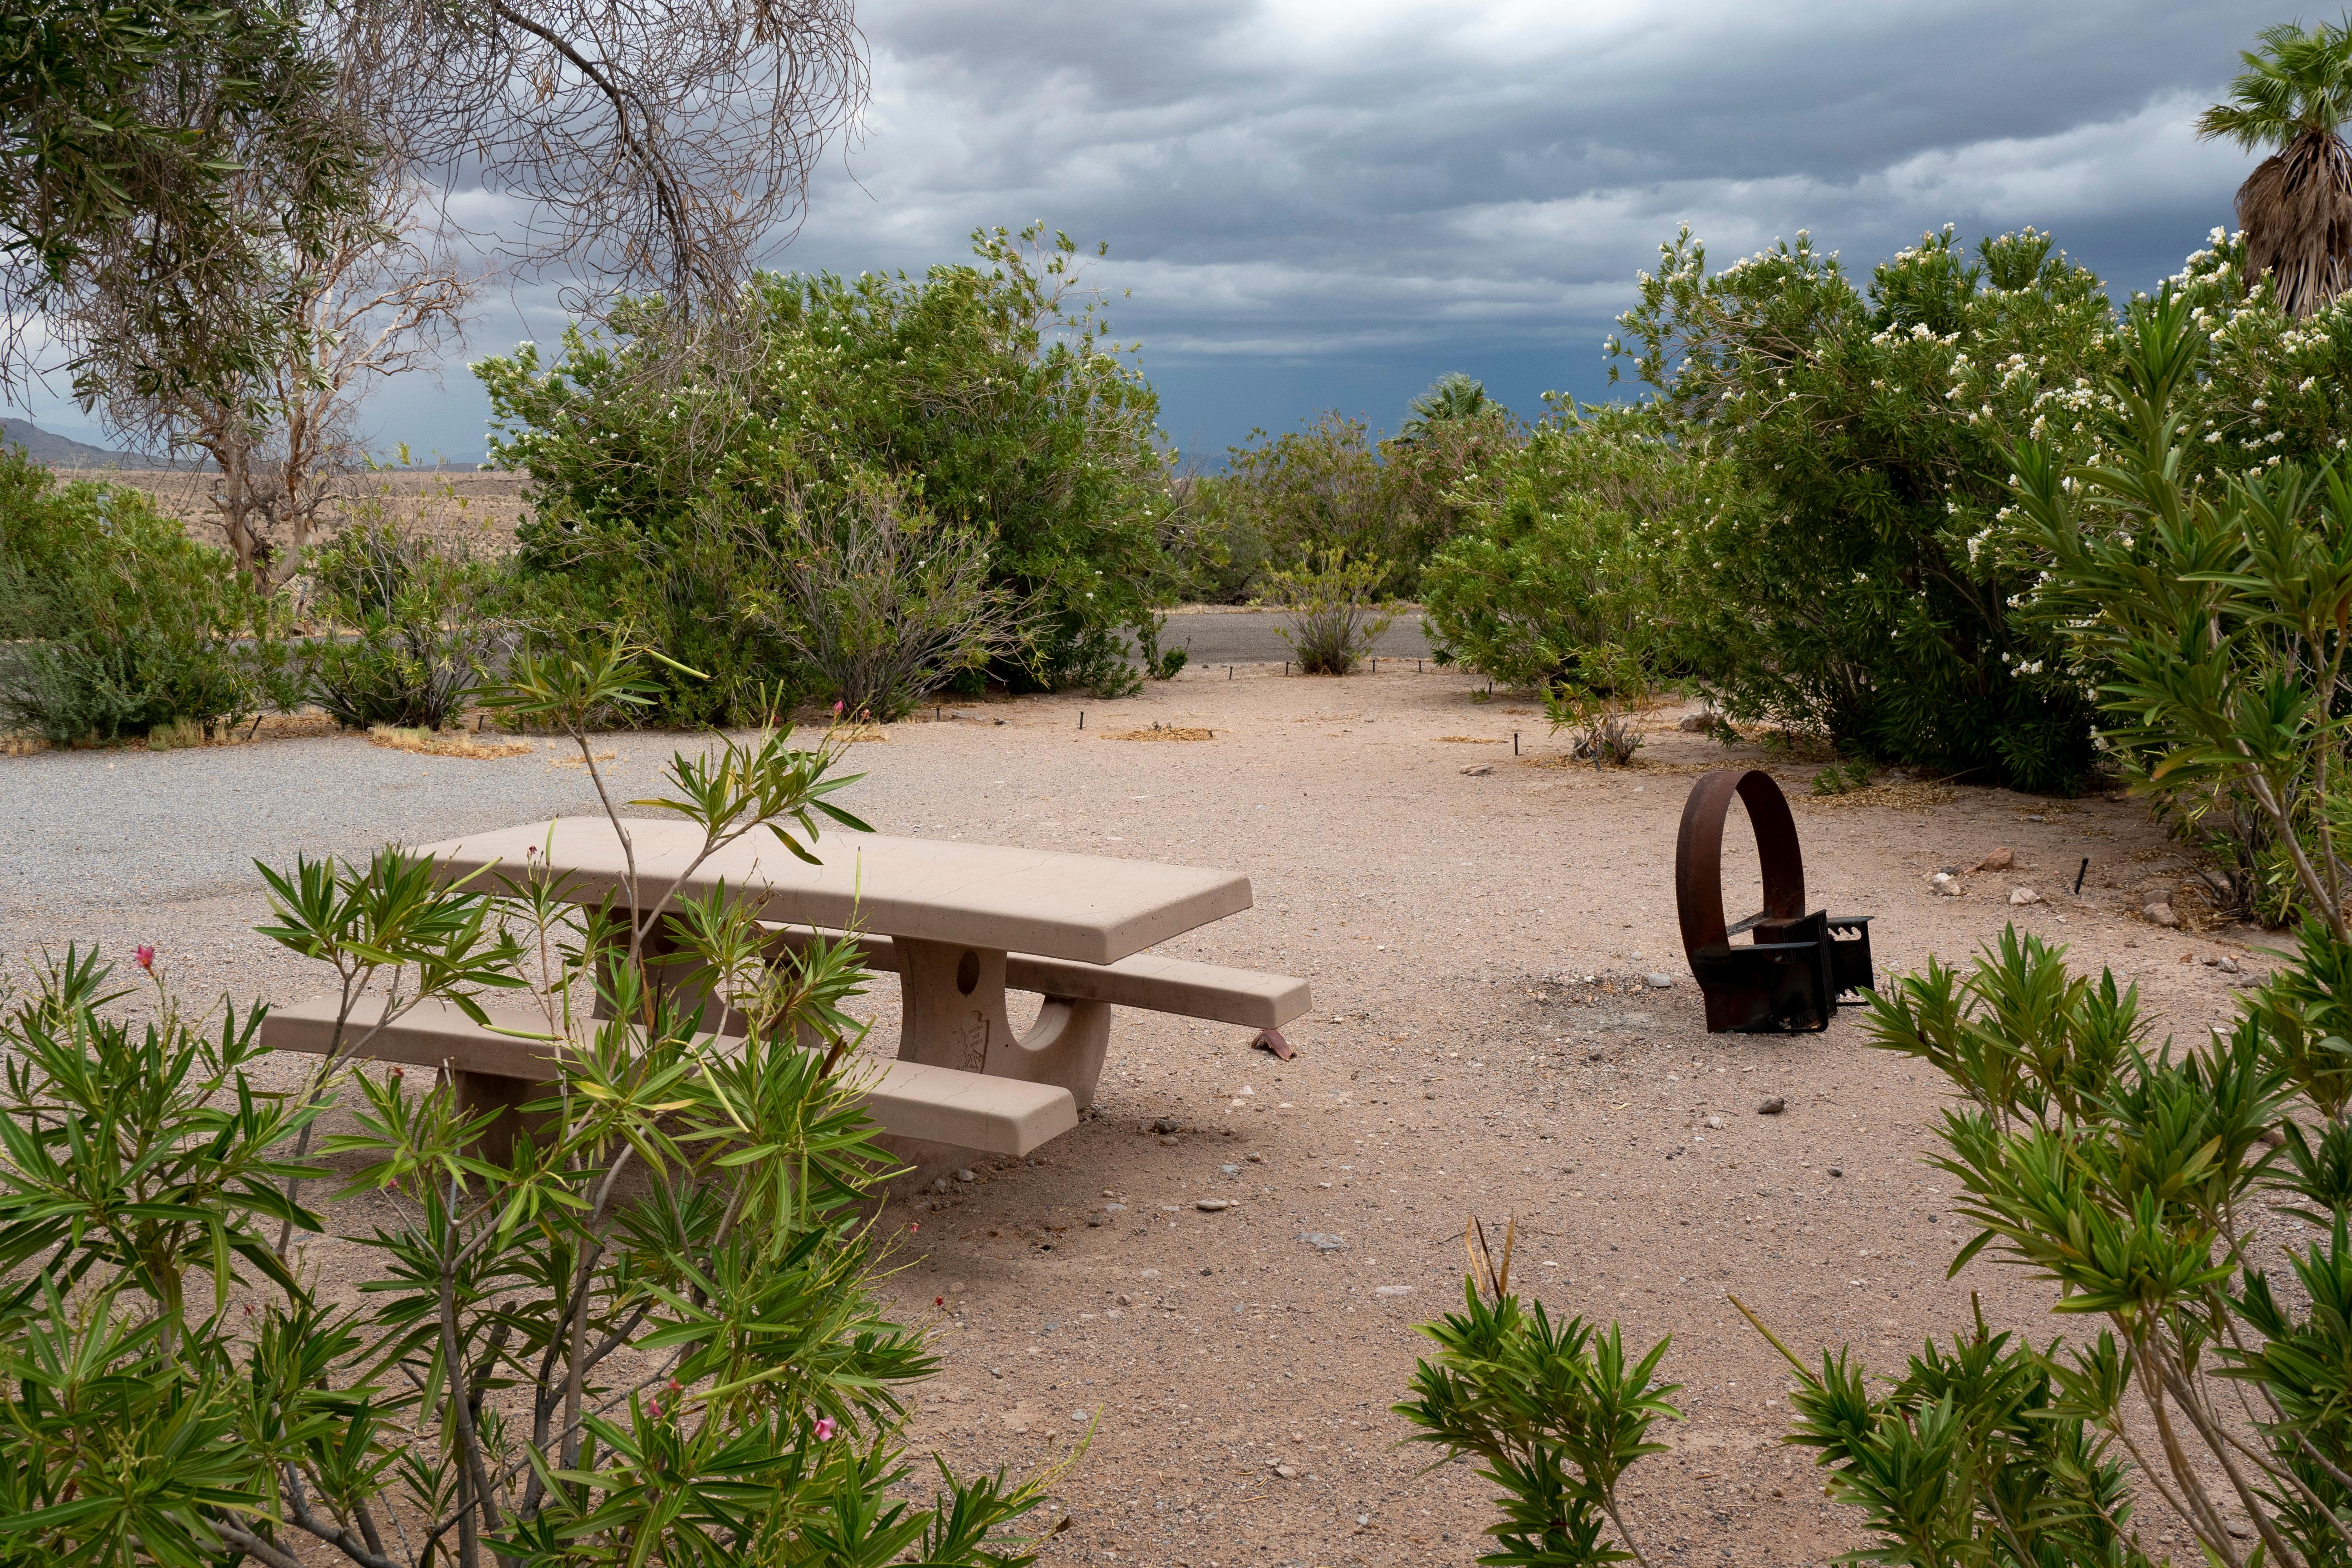 Campsite with desert trees and a picnic table.